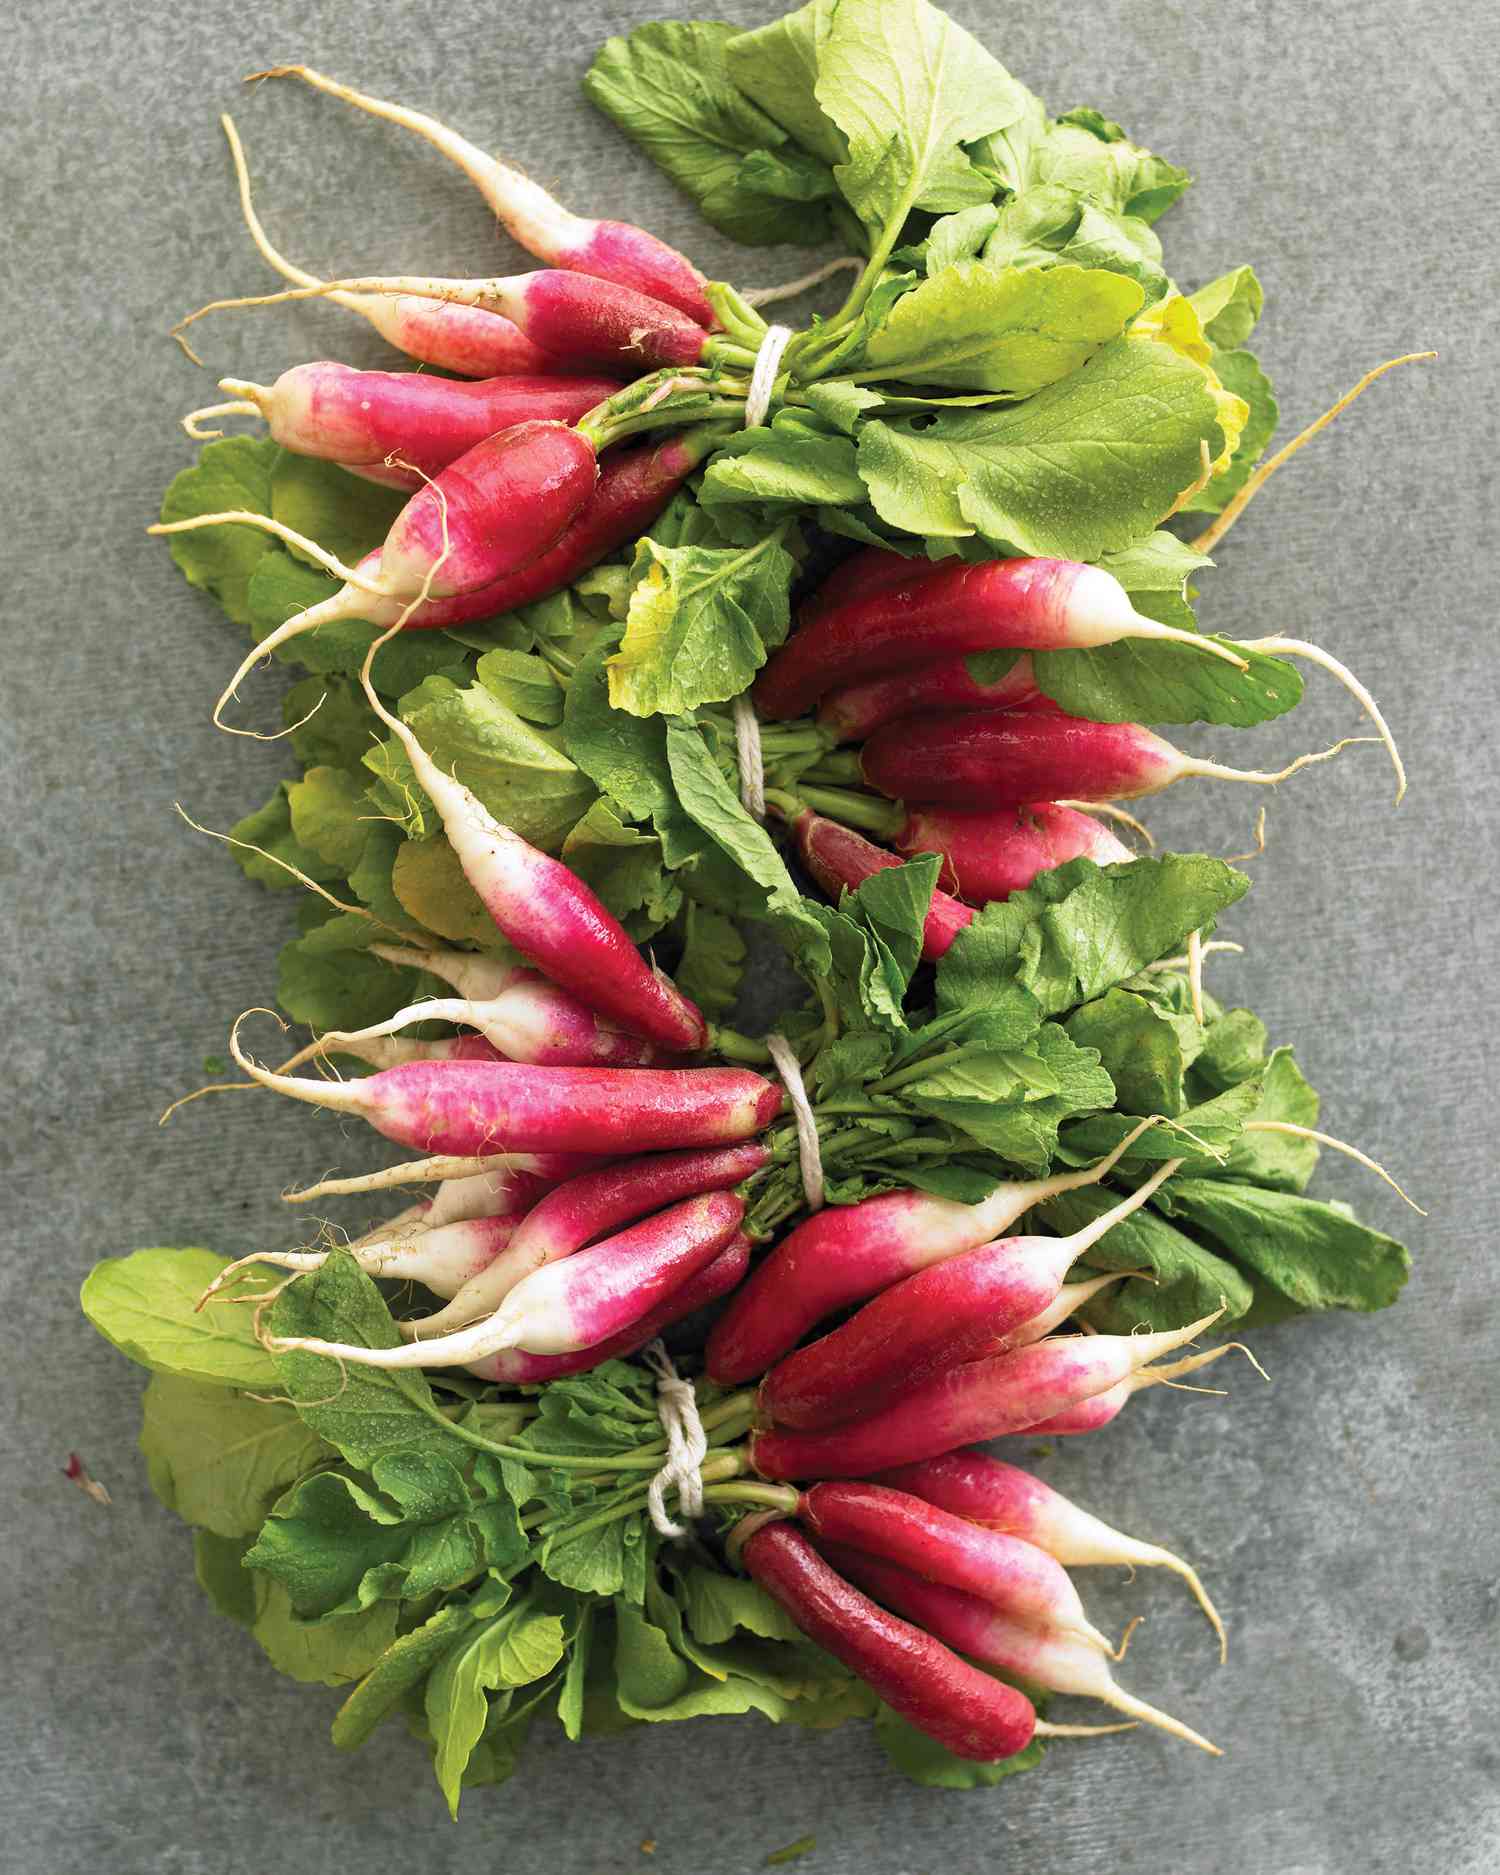 radishes-great-finds-msl0513-mld106124.jpg